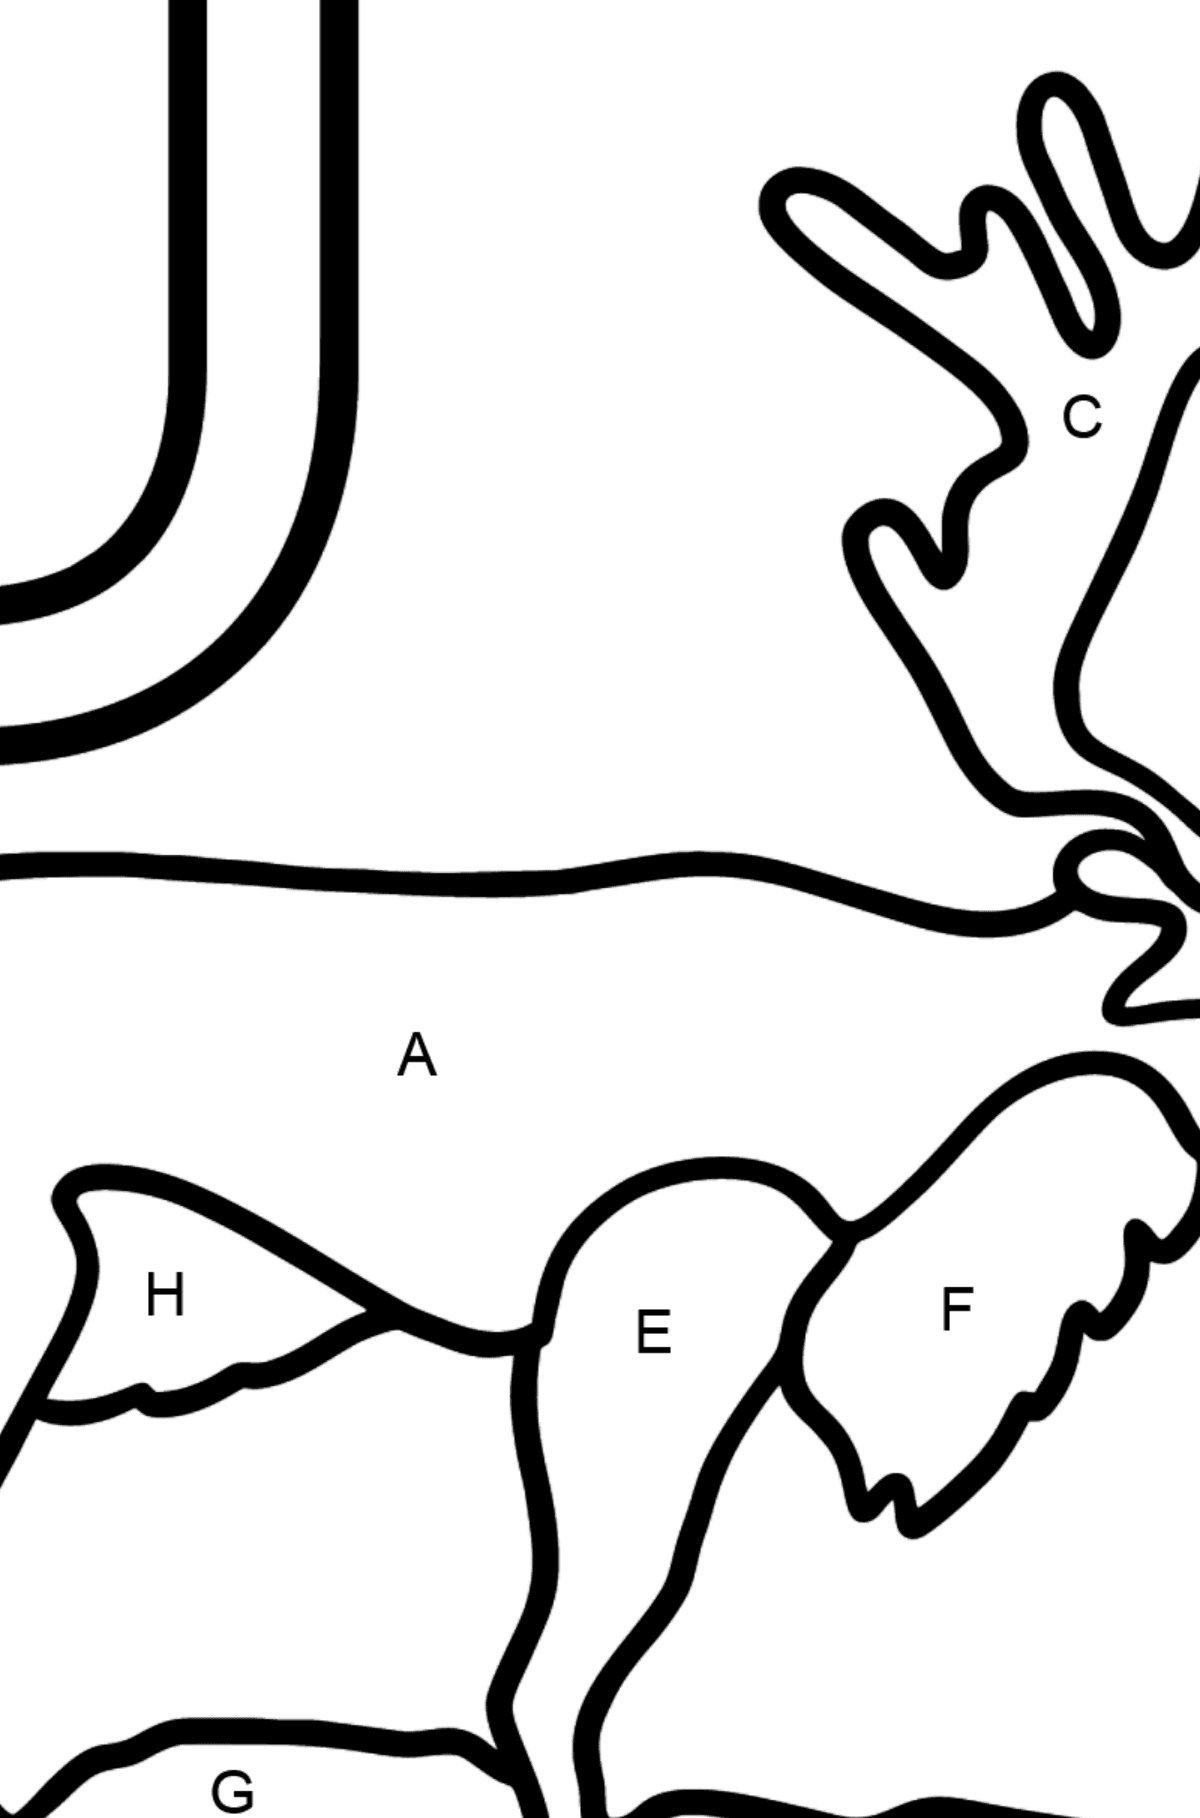 Spanish Letter U coloring pages - UAPITI - Coloring by Letters for Kids